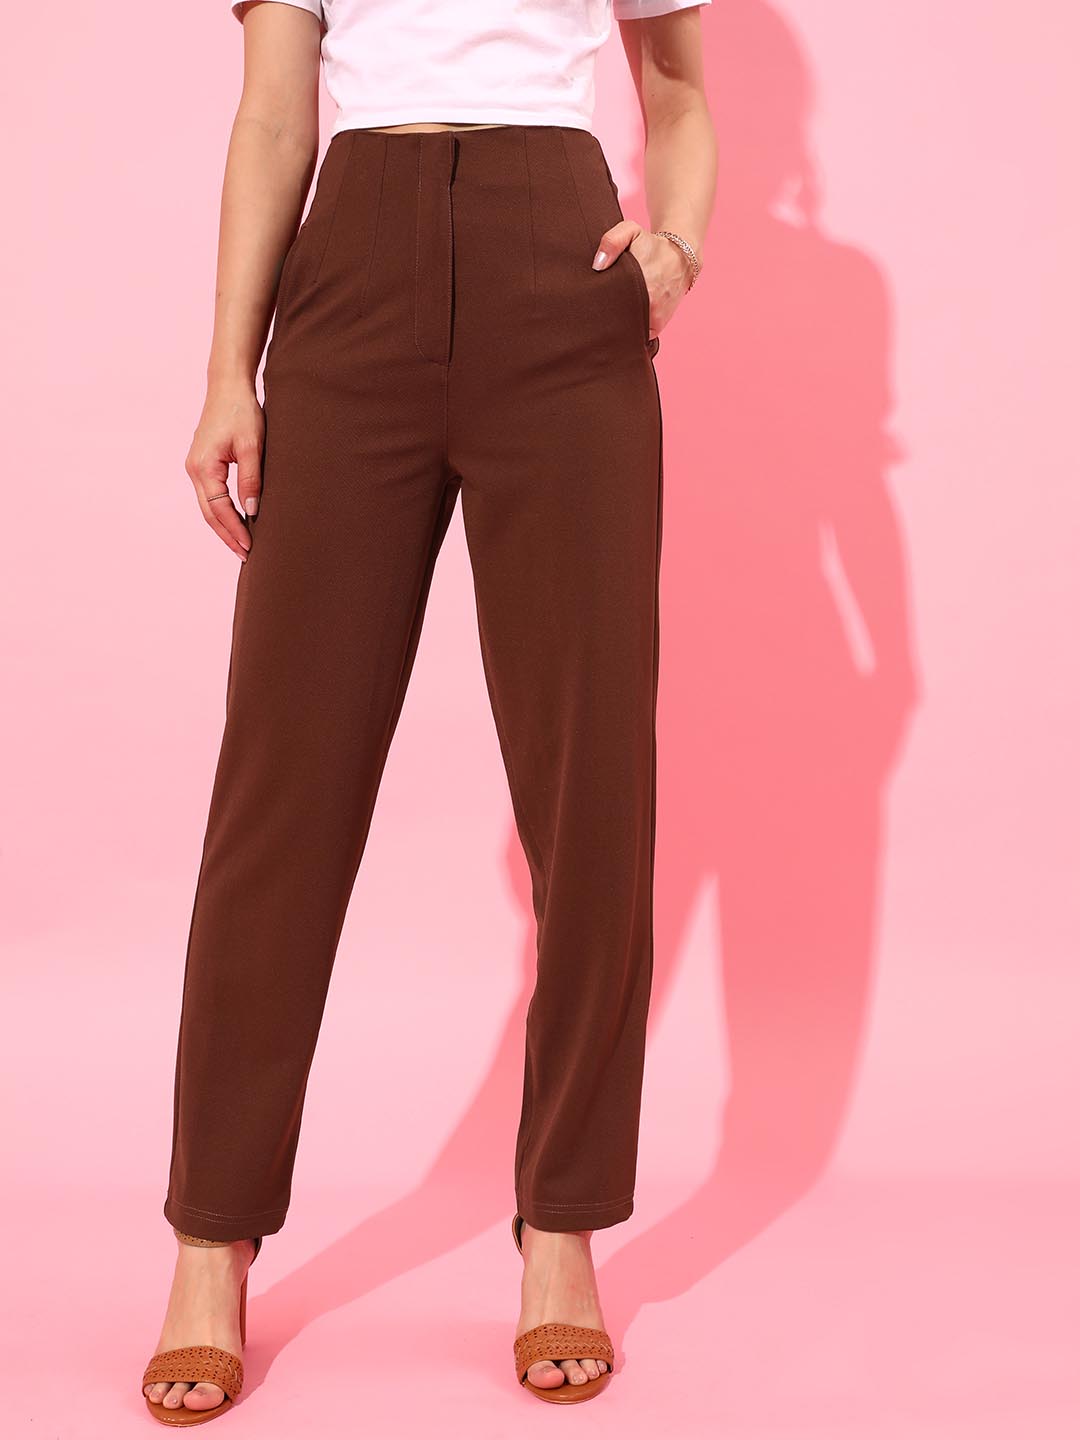 Buy Street 9 Brown Regular Fit Trousers from top Brands at Best Prices  Online in India  Tata CLiQ